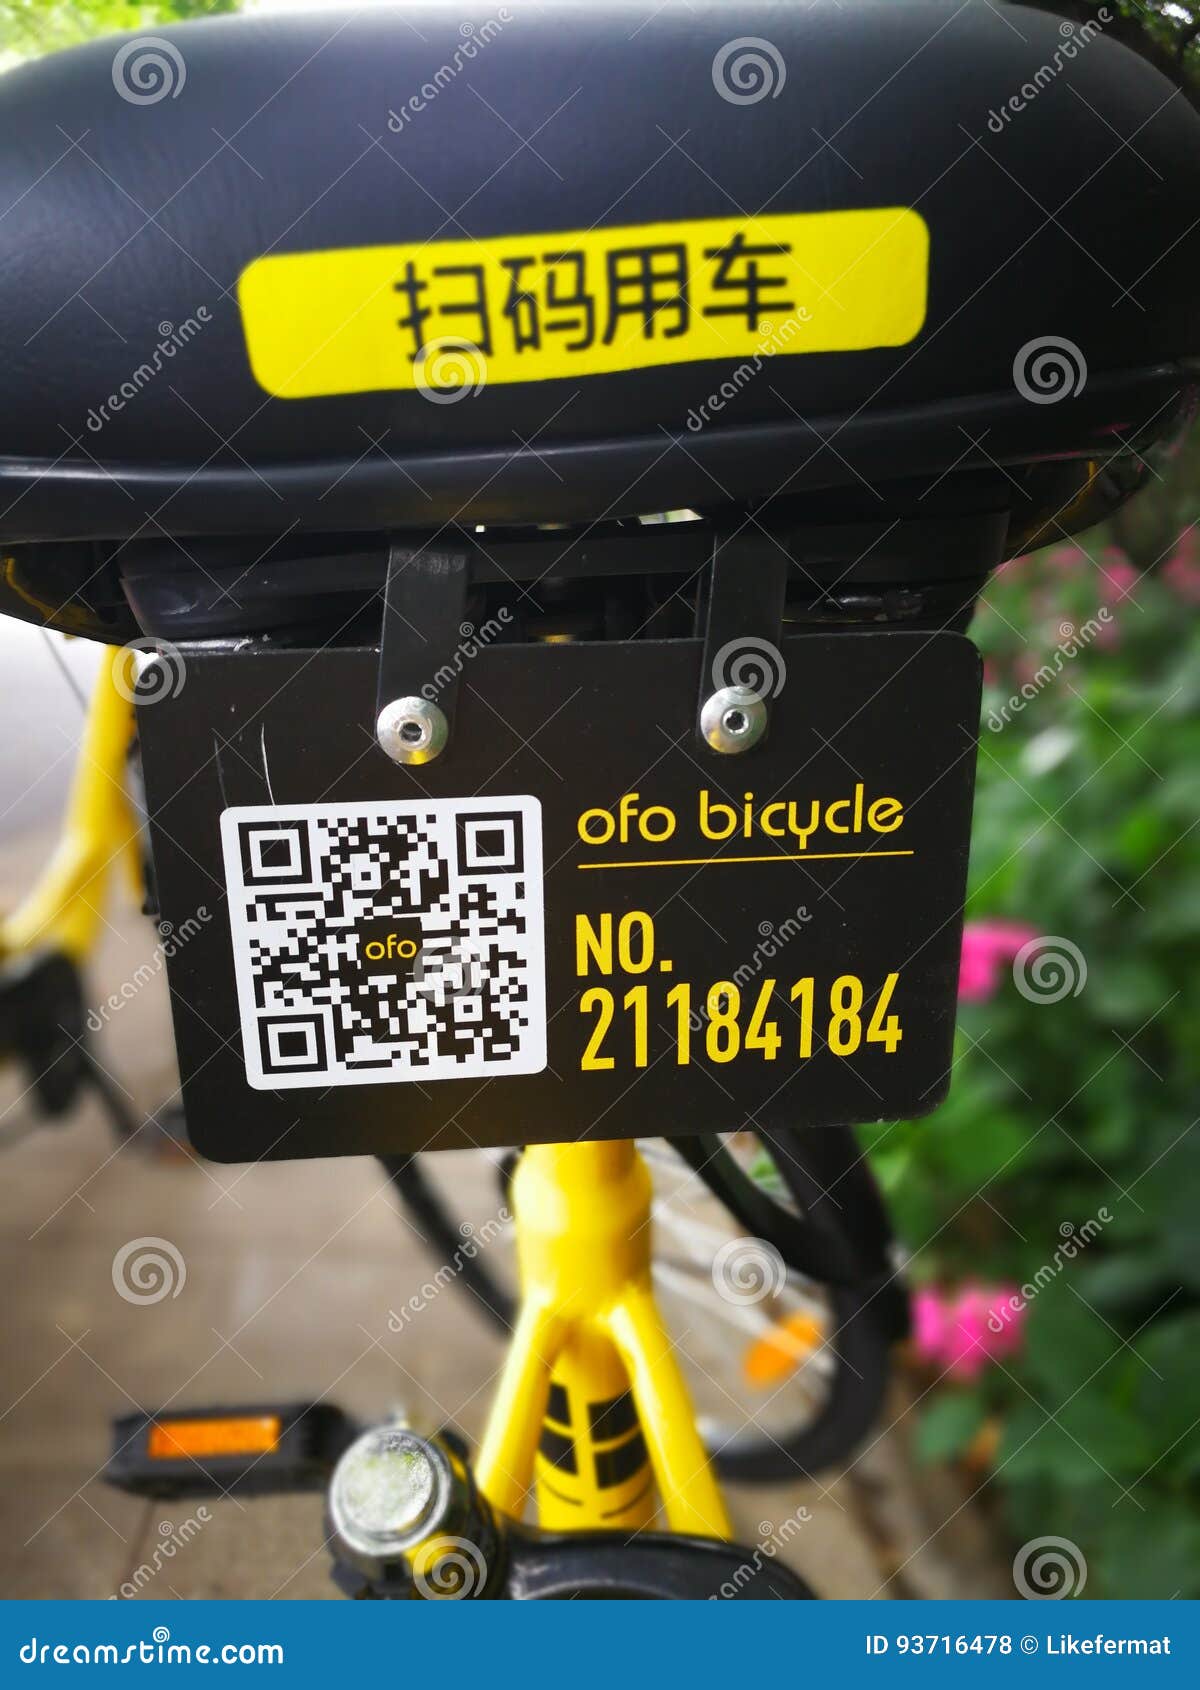 qr-code-serial-number-ofo-bike-famous-bicycle-sharing-chia-people-can-use-phone-to-scan-input-to-open-93716478.jpg